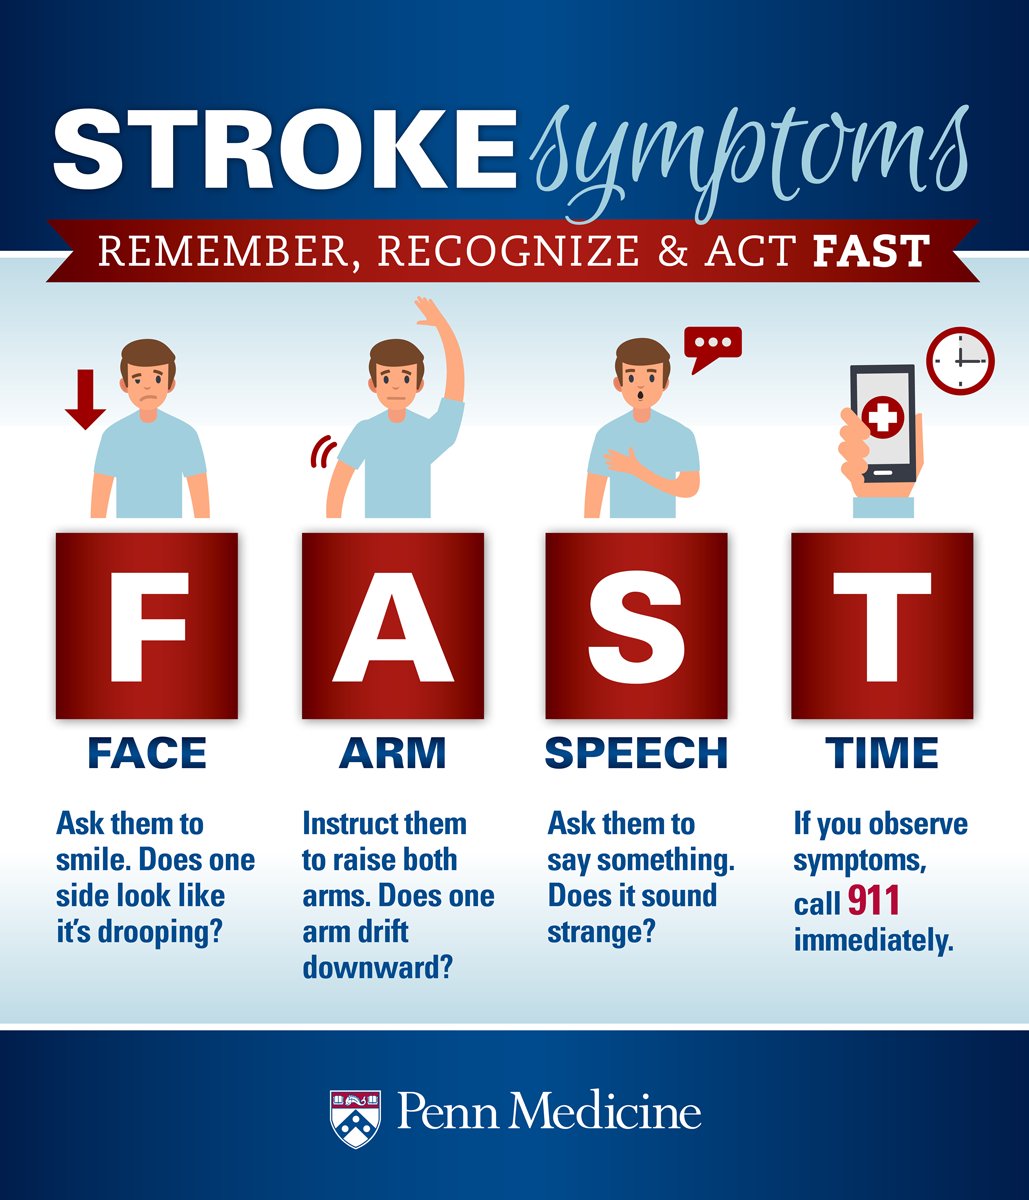 Acting FAST can save a life. This #StrokeAwarenessMonth, take a minute to review the signs of stroke and seek medical attention immediately if you see someone experiencing them.